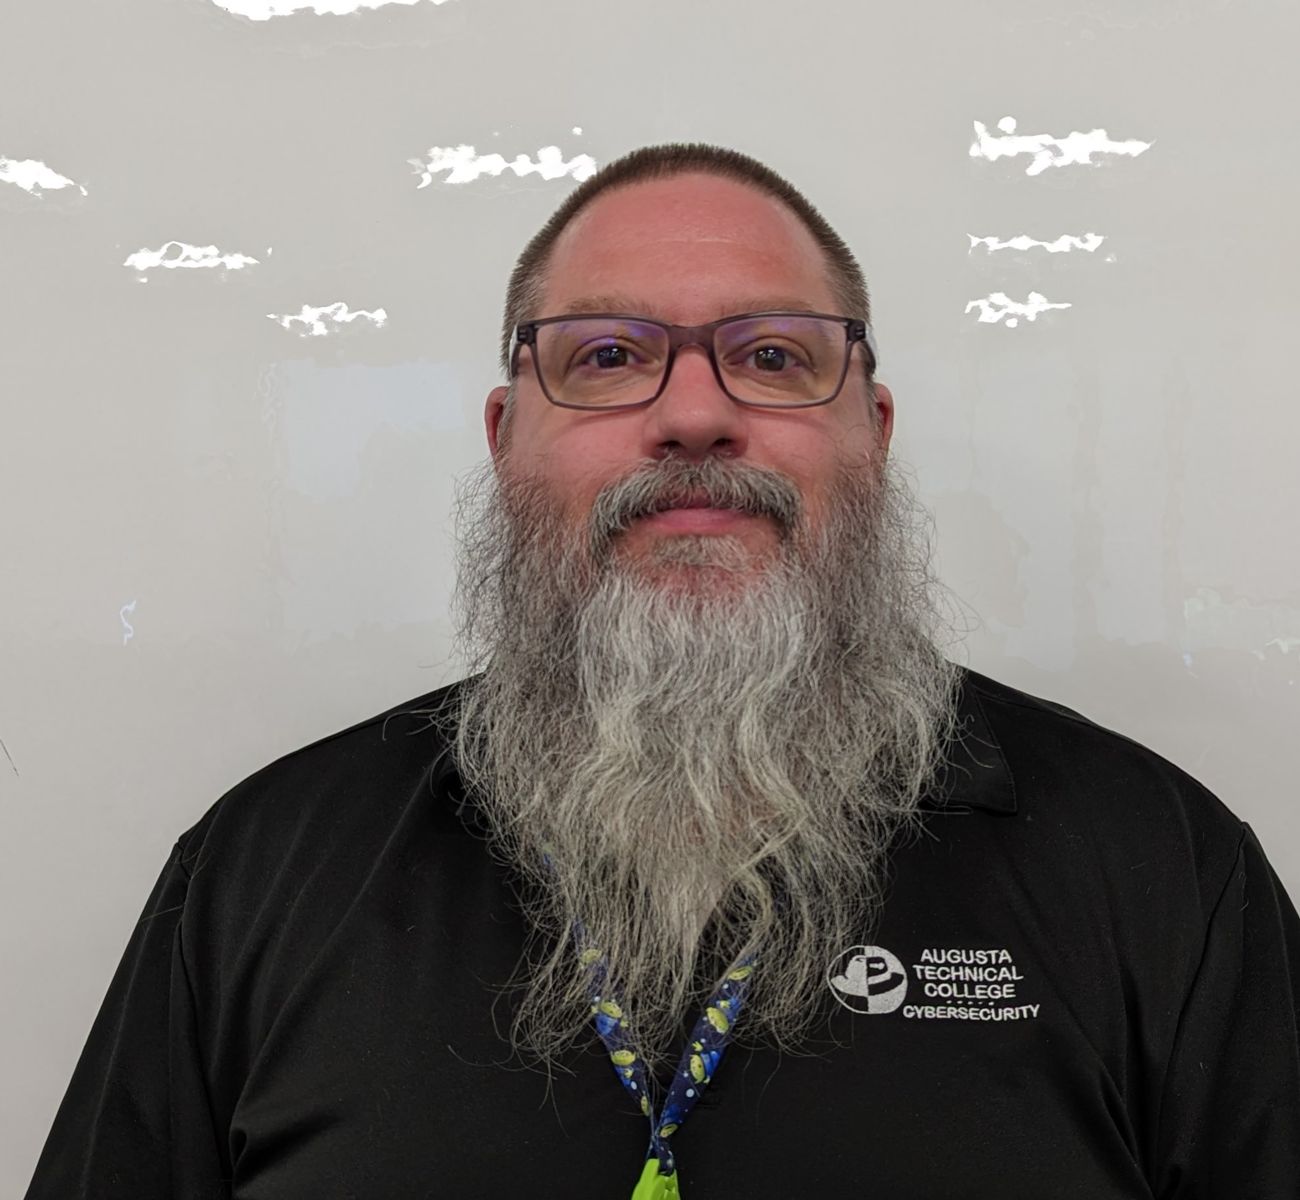 A Caucasian male with short brown hair and grey beard wearing a black Augusta Technical College Cybersecurity shirt. 